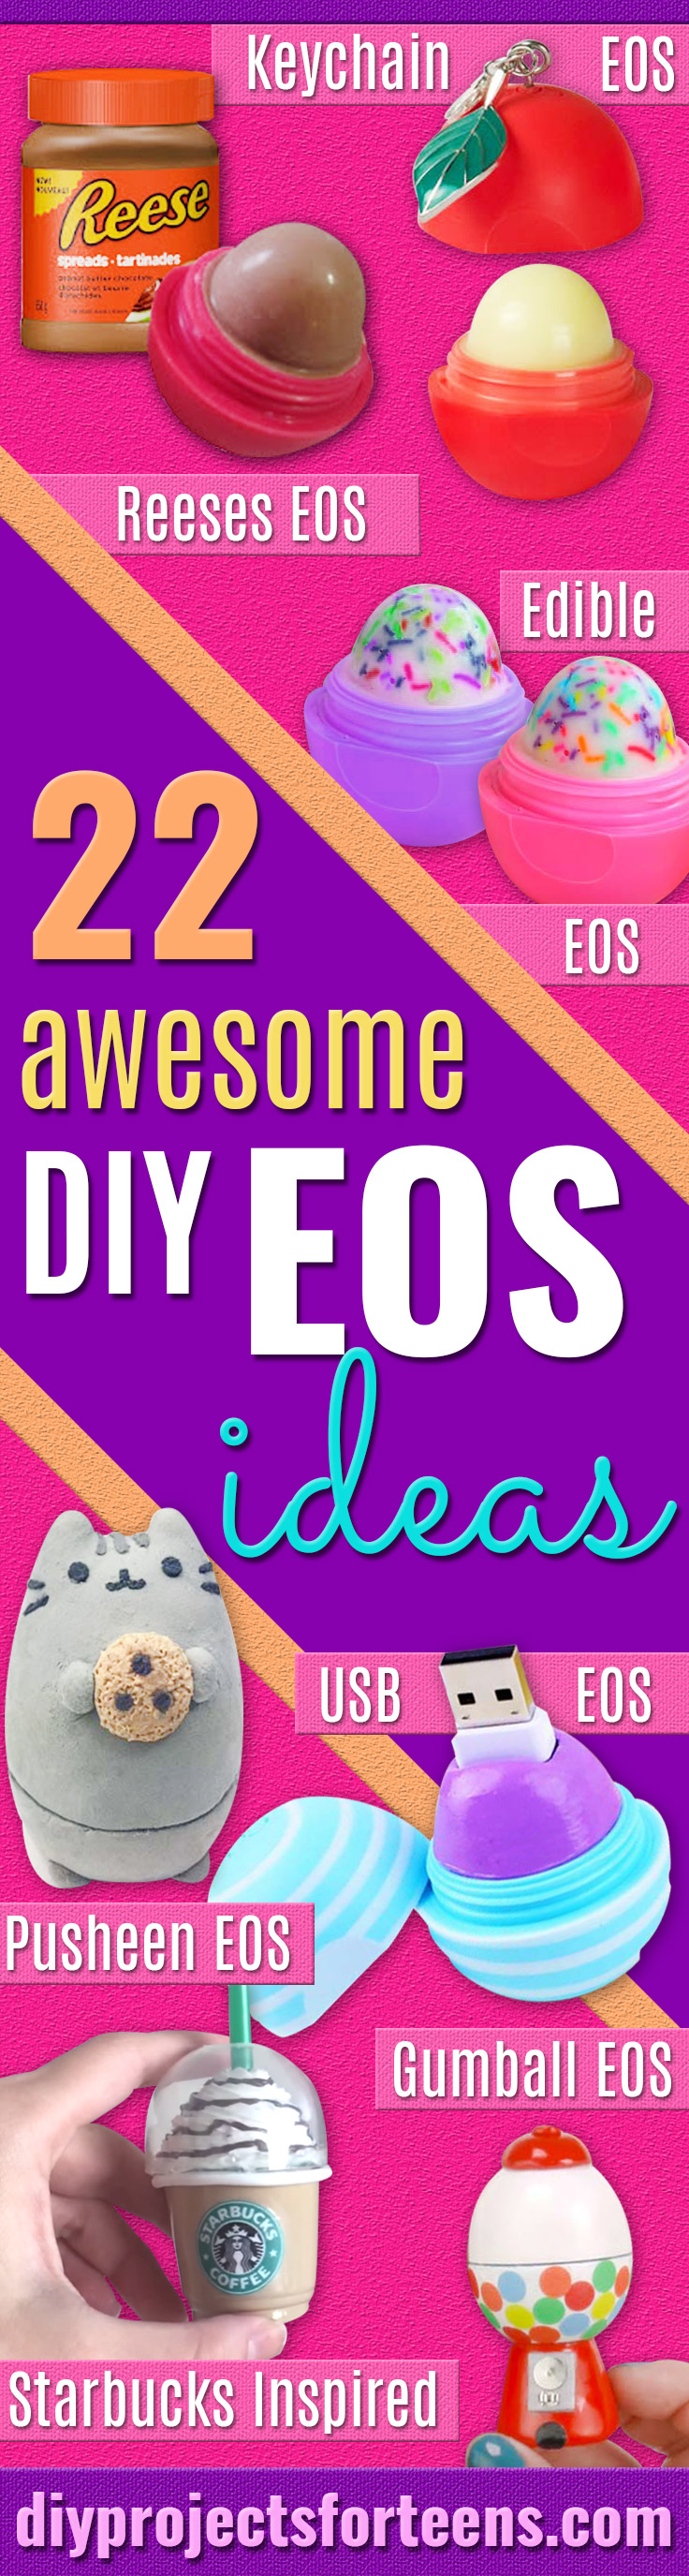 22 Most Awesome DIY EOS ideas - Best DIY EOS Projects - DIY Secret Eos Lip Balm Container - Turn Old EOS Containers Into Cool Crafts Ideas Like Lip Balm, Galaxy, Gumball Machine, and Watermelon - Fun, Cheap and Easy DIY Projects Tutorials and Videos for Teens, Tweens, Kids and Adults s